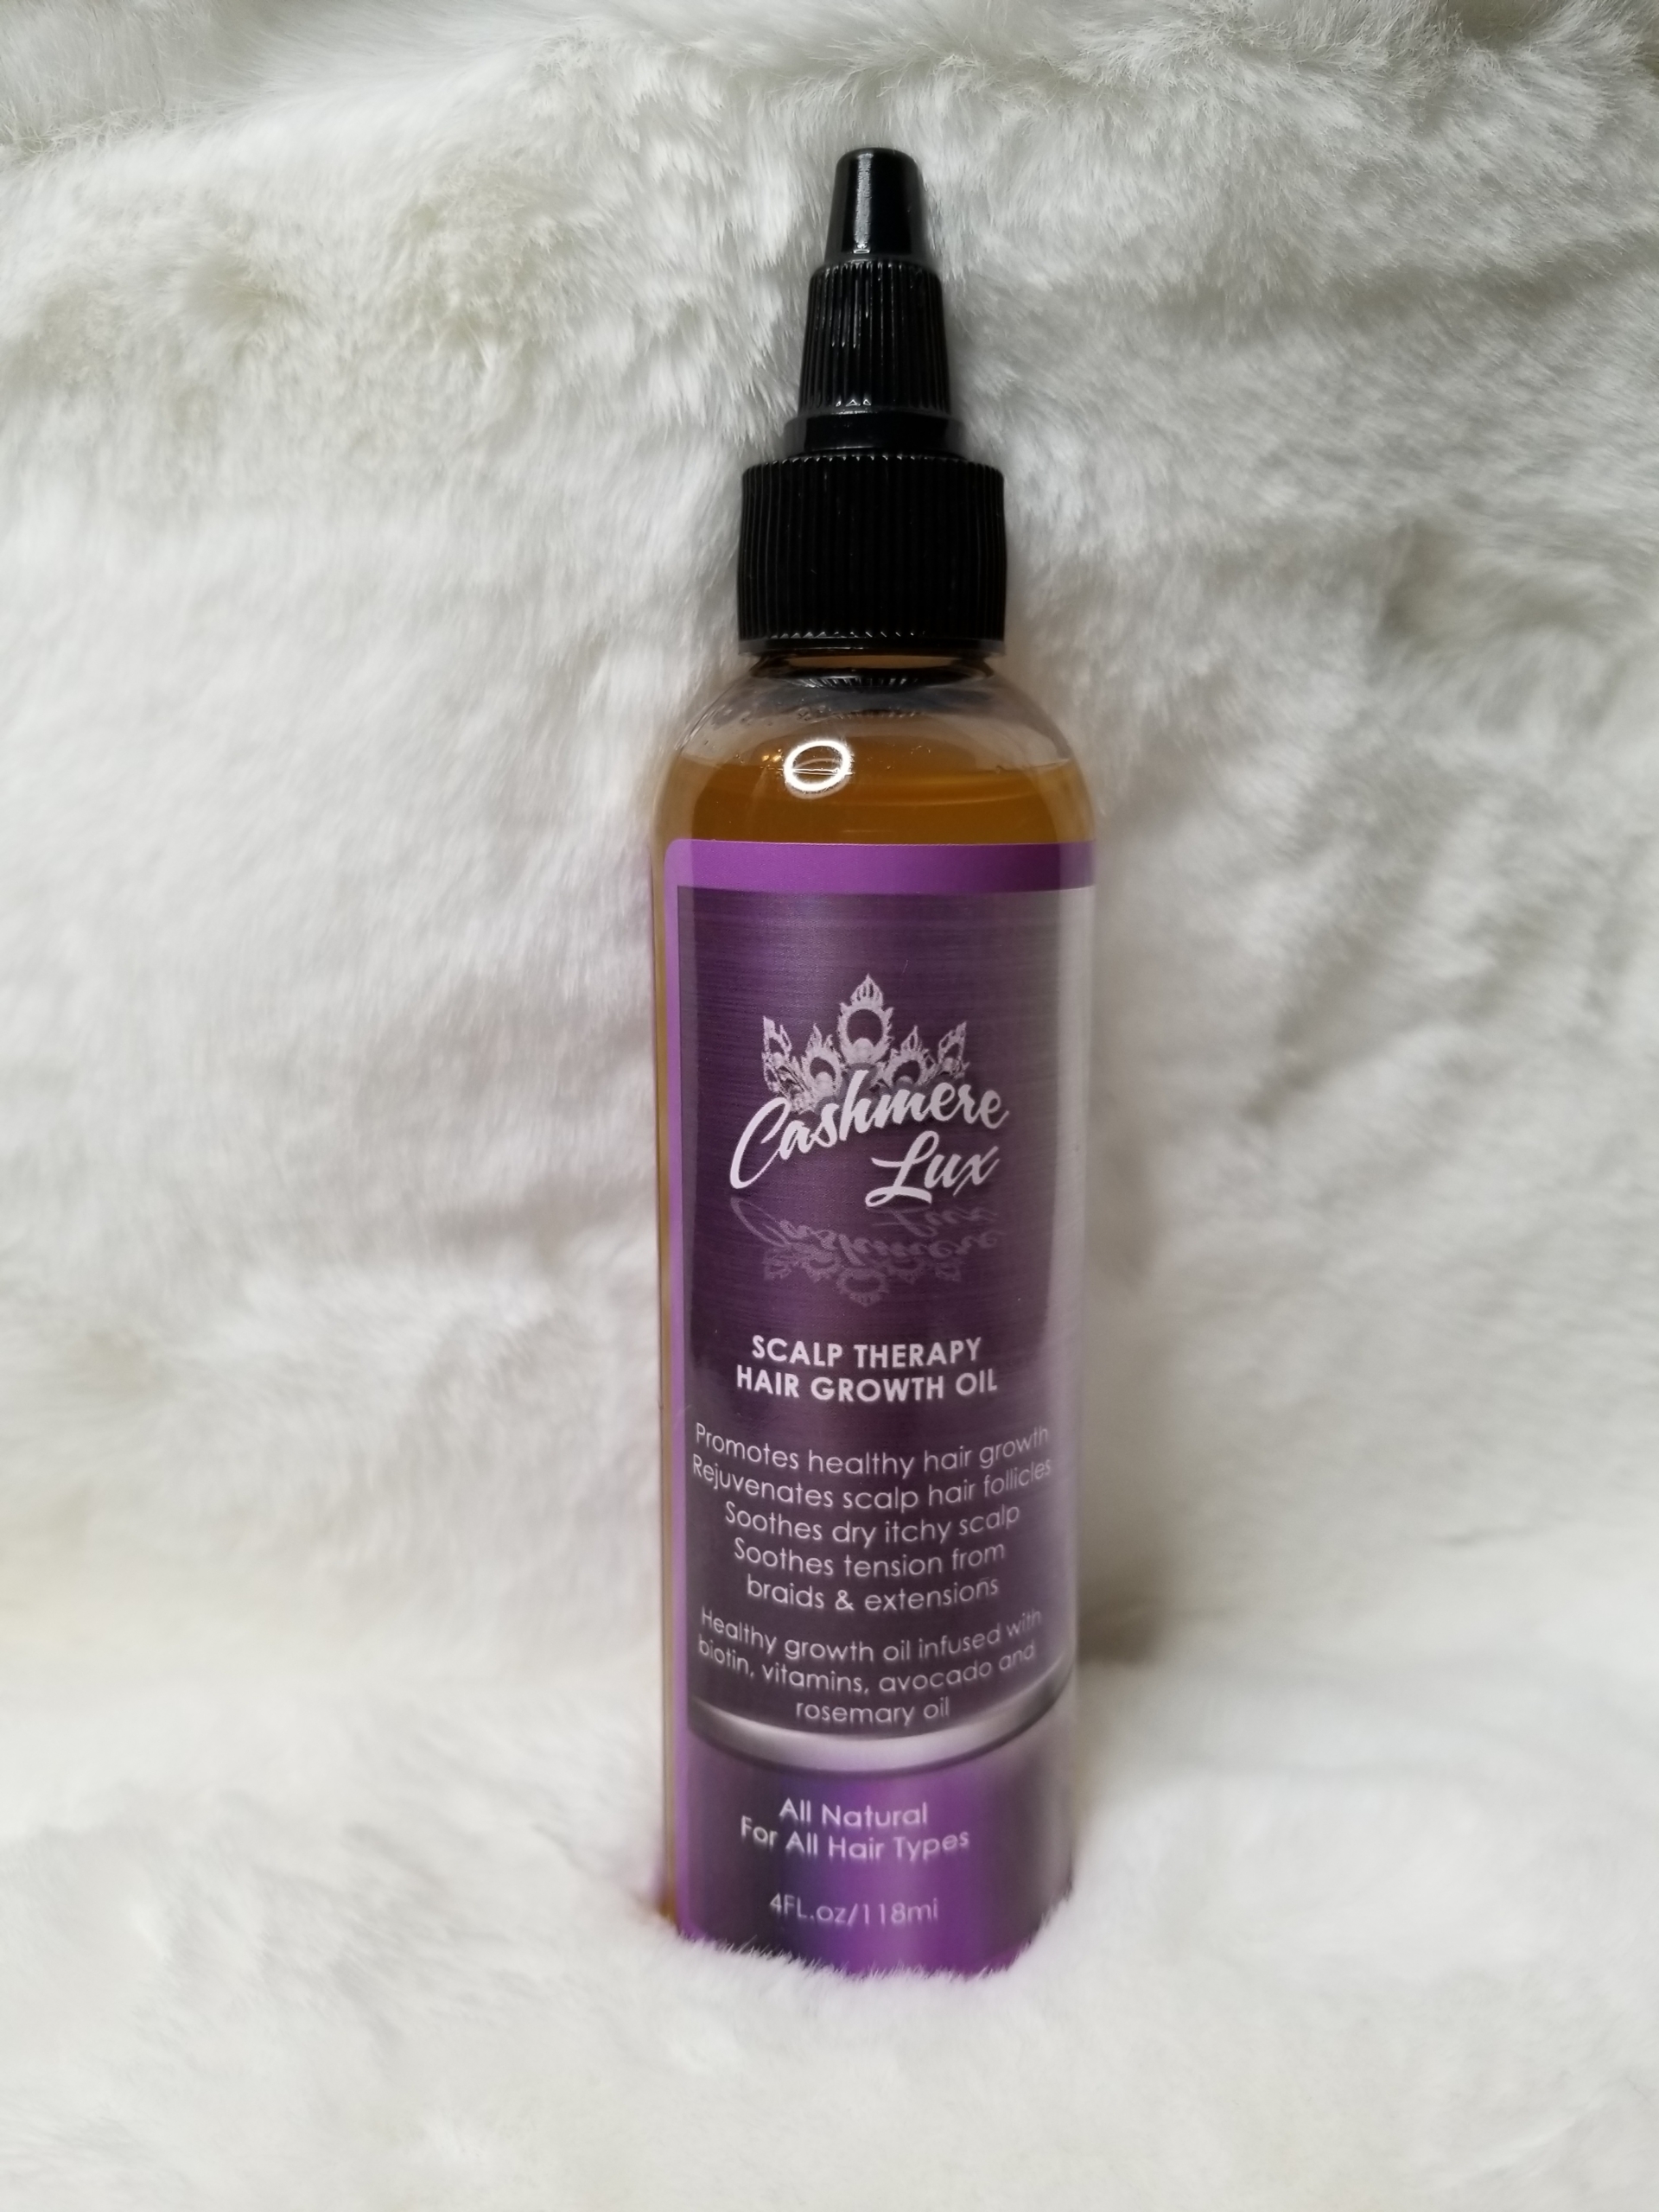 Scalp Therapy Growth Oil - Cashmere Lux Hair Salon